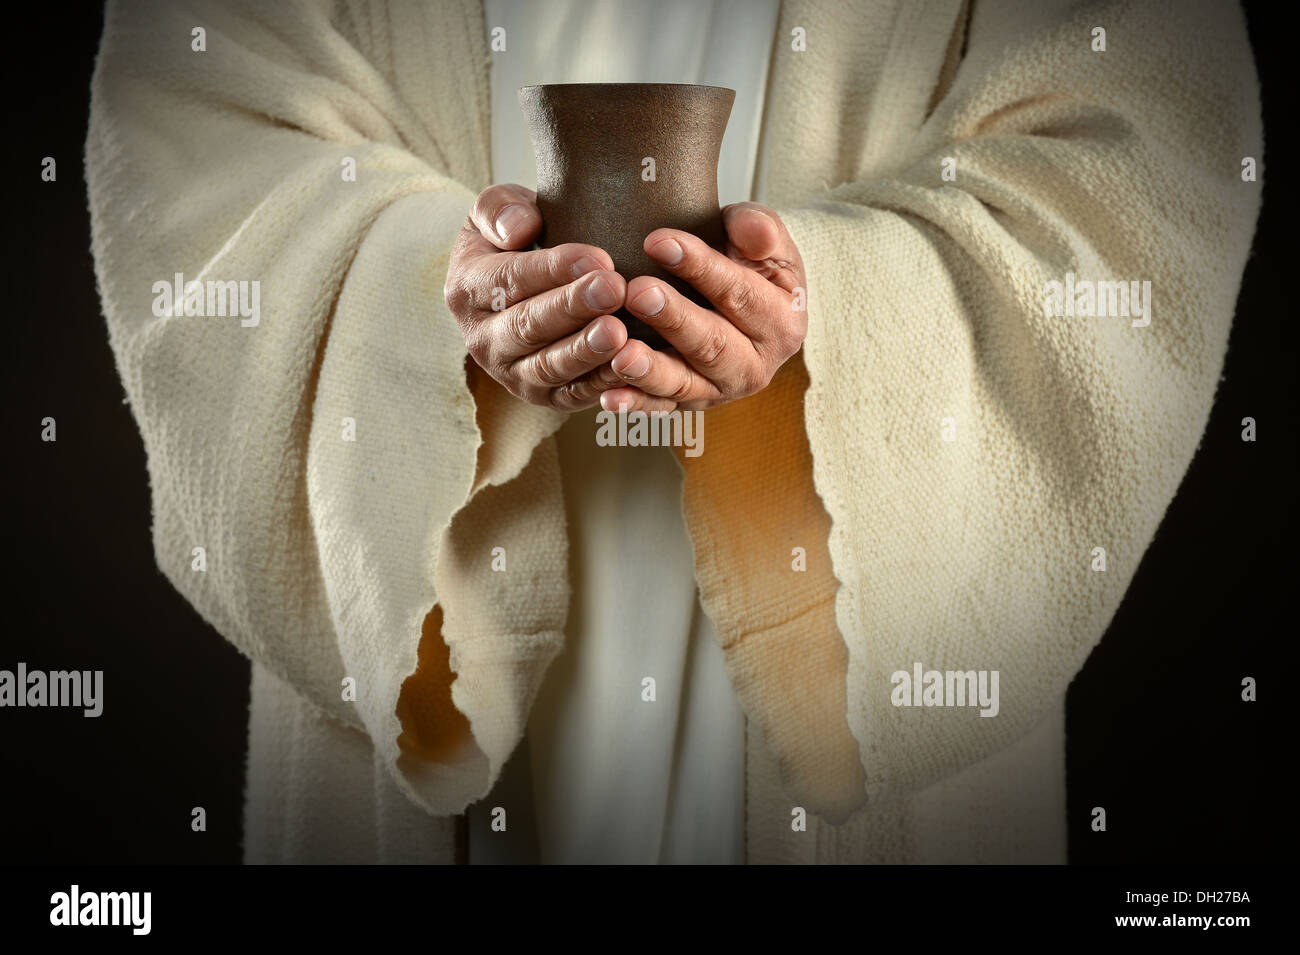 The hands of Jesus holding wine cup, symbol of communion Stock Photo